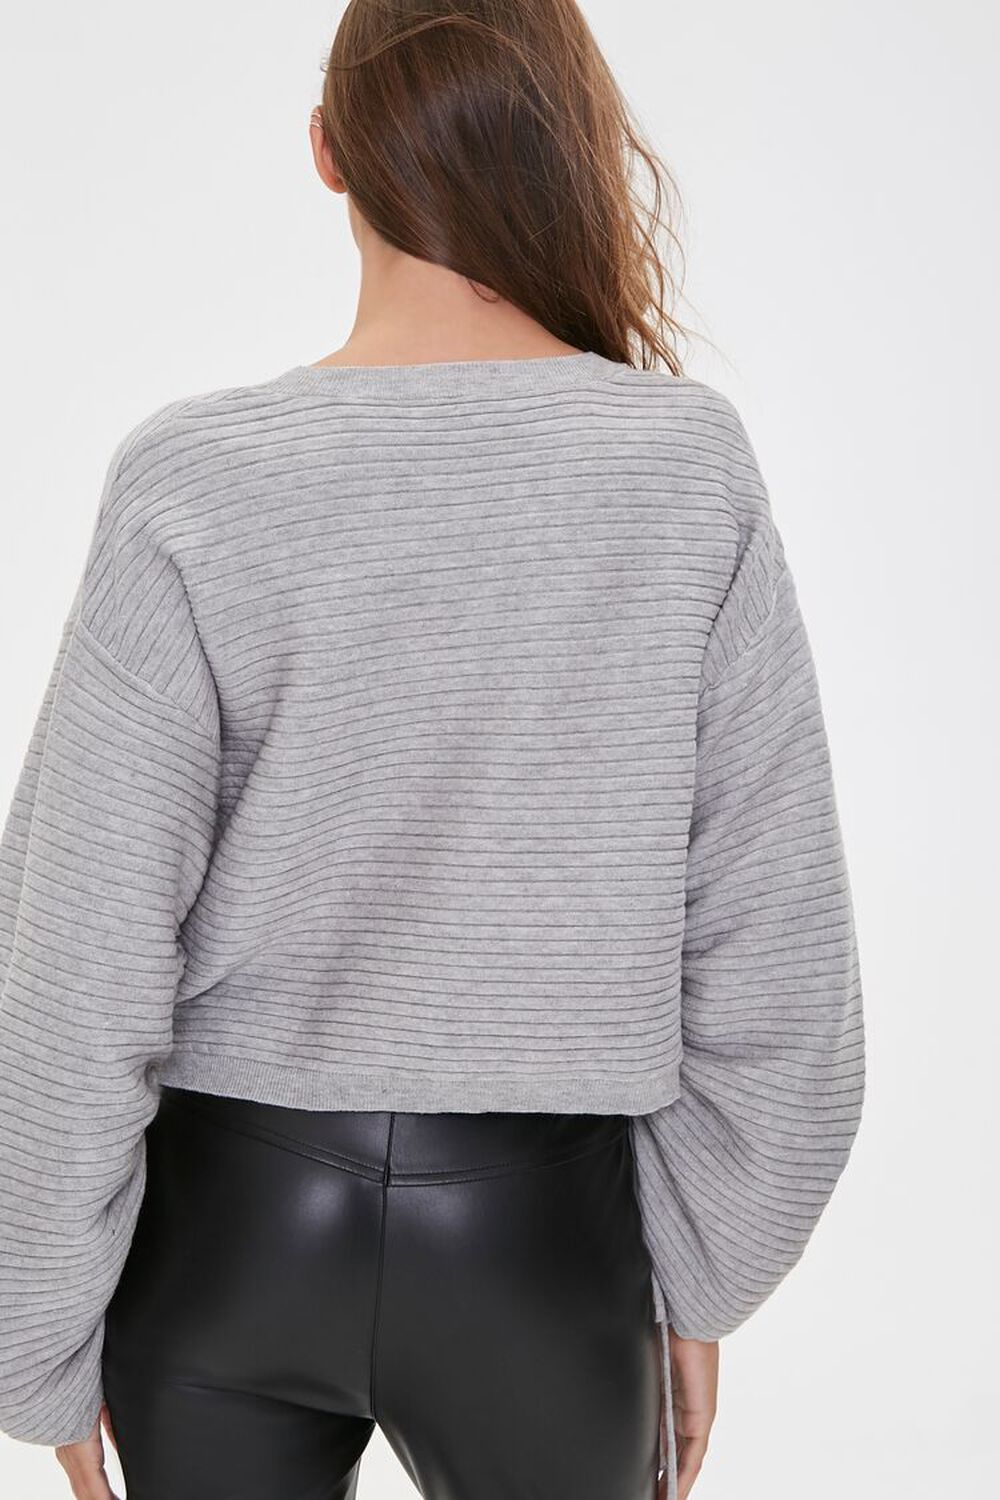 HEATHER GREY Ribbed Ruched-Sleeve Sweater, image 3